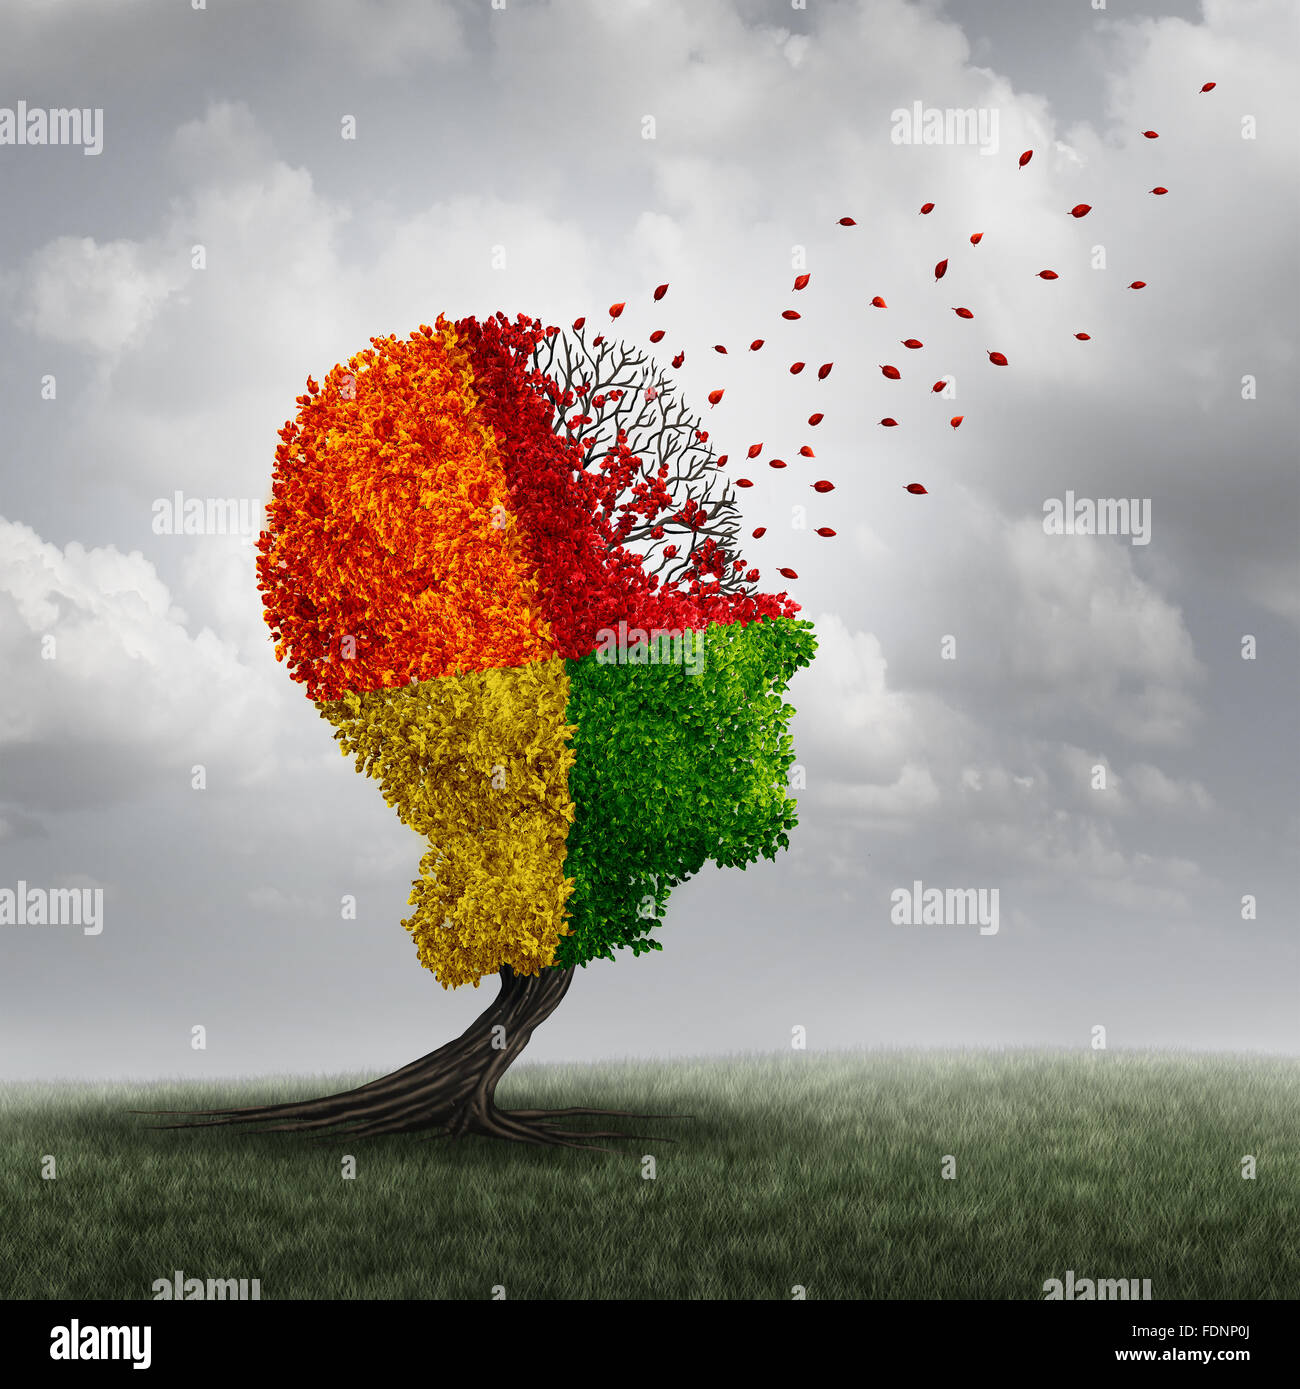 Dementia brain loss memory problem and aging due to cognitive disease and alzheimer's illness as a medical icon of a group of color changing autumn fall tree shaped as a human head losing leaves with winds of change. Stock Photo